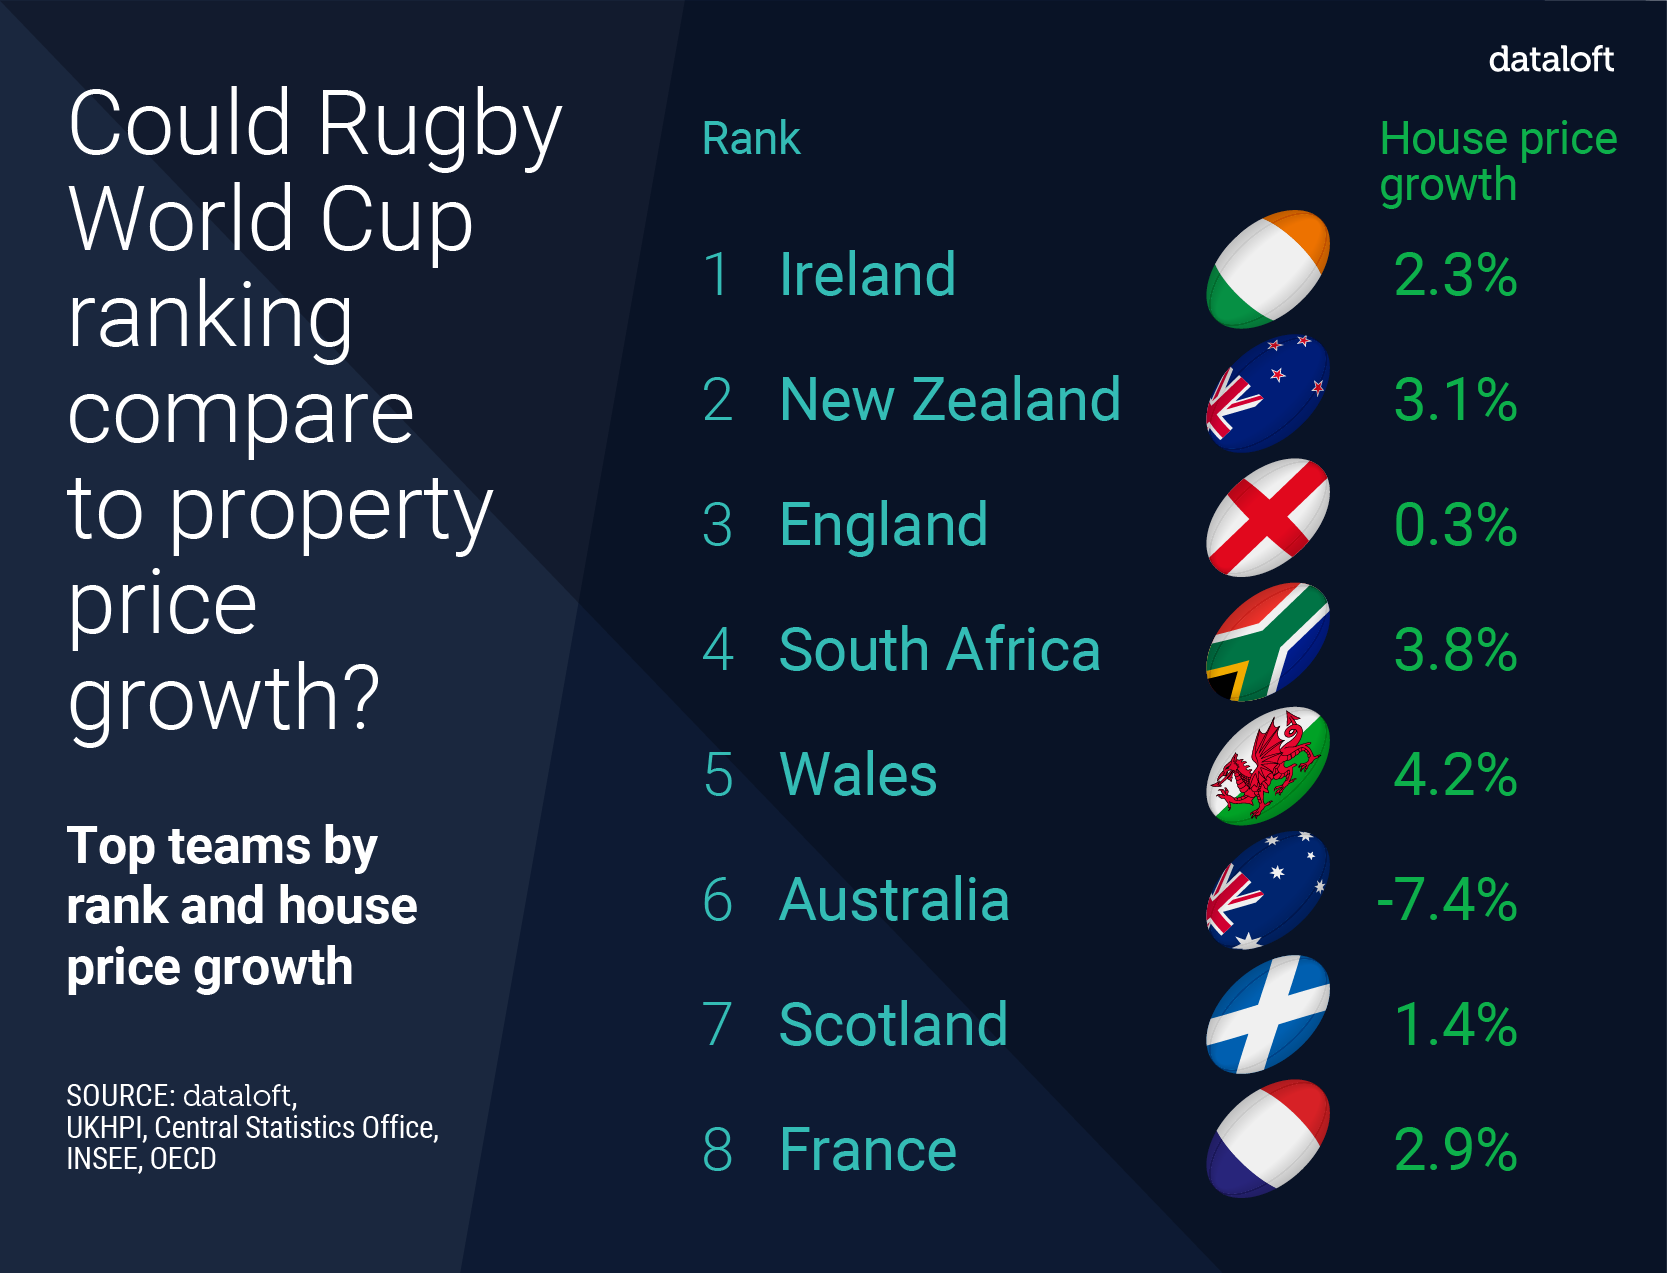 Could Rugby World Cup ranking compare to property price growth?